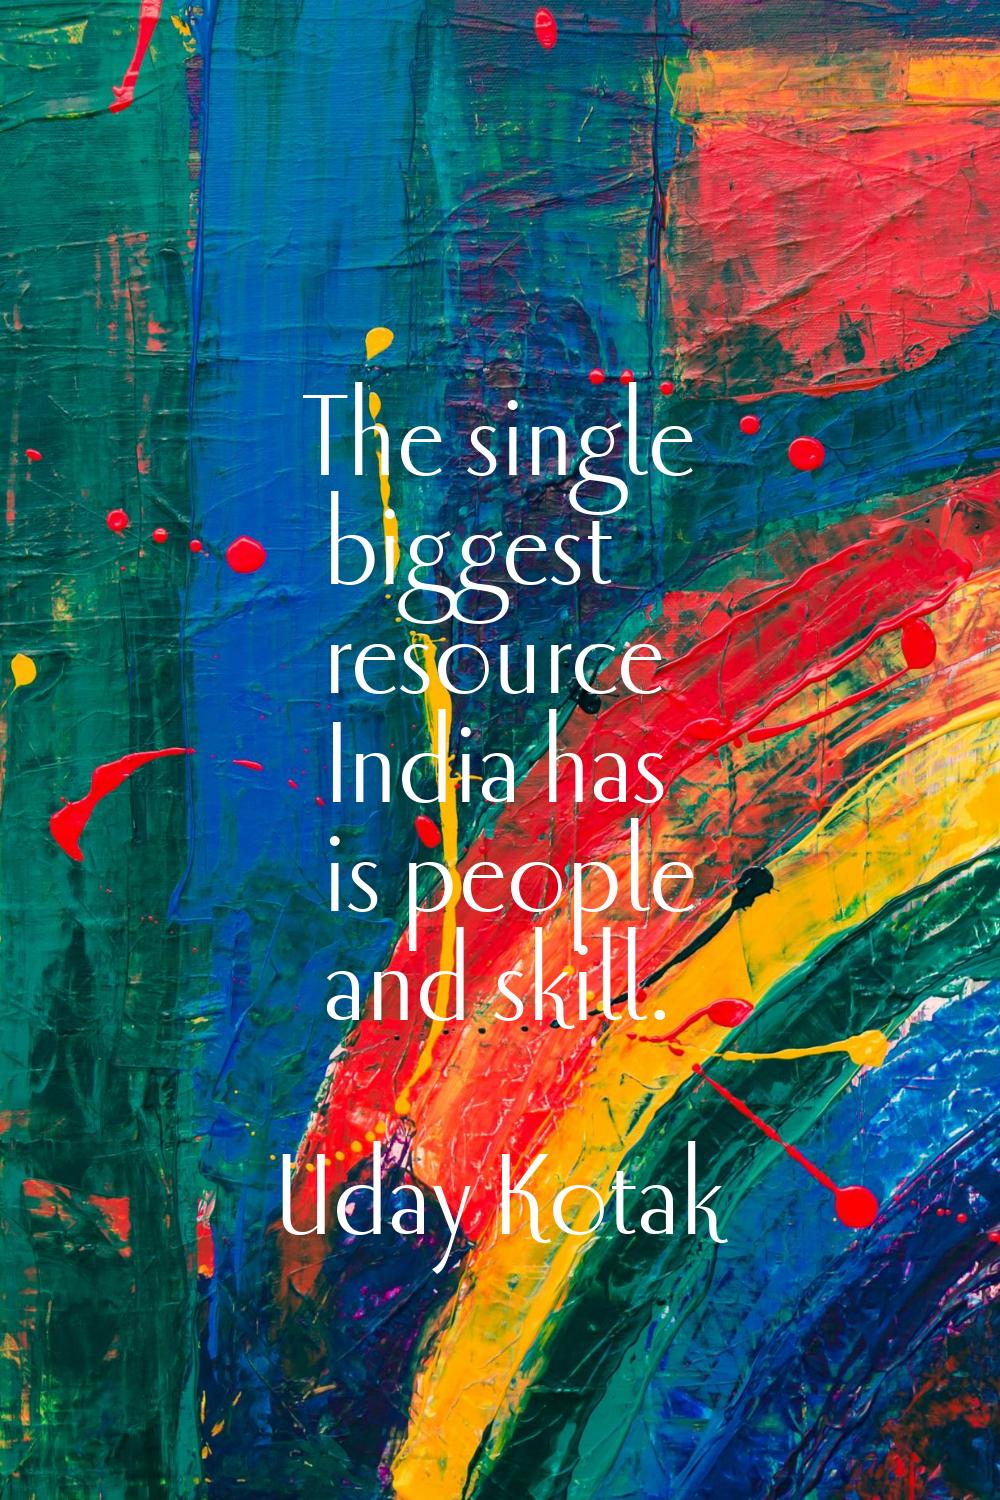 The single biggest resource India has is people and skill.